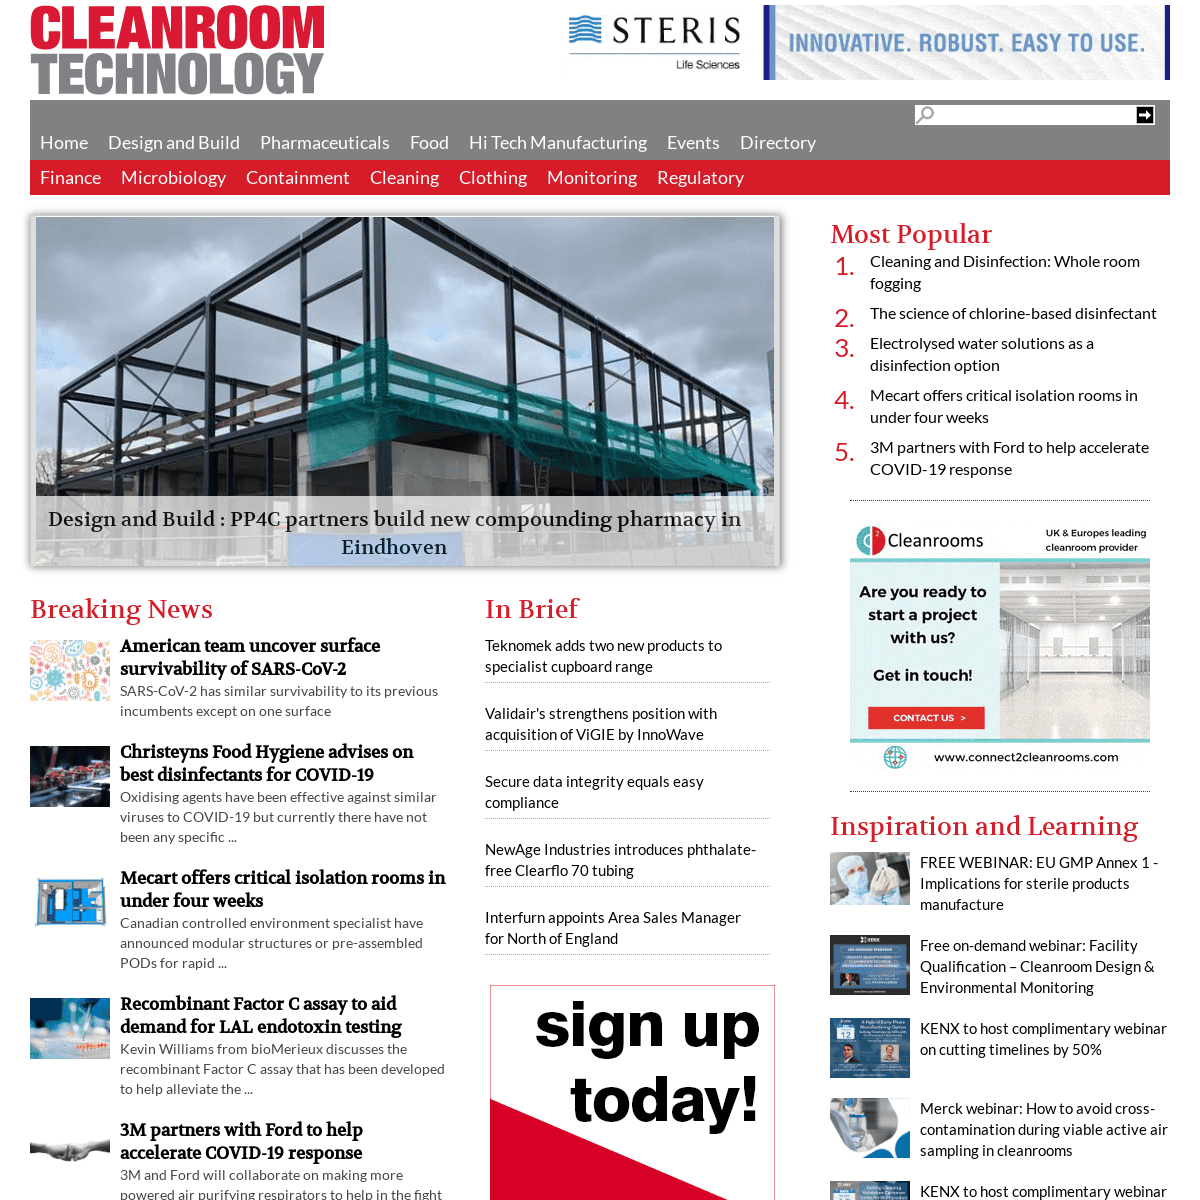 A complete backup of cleanroomtechnology.com